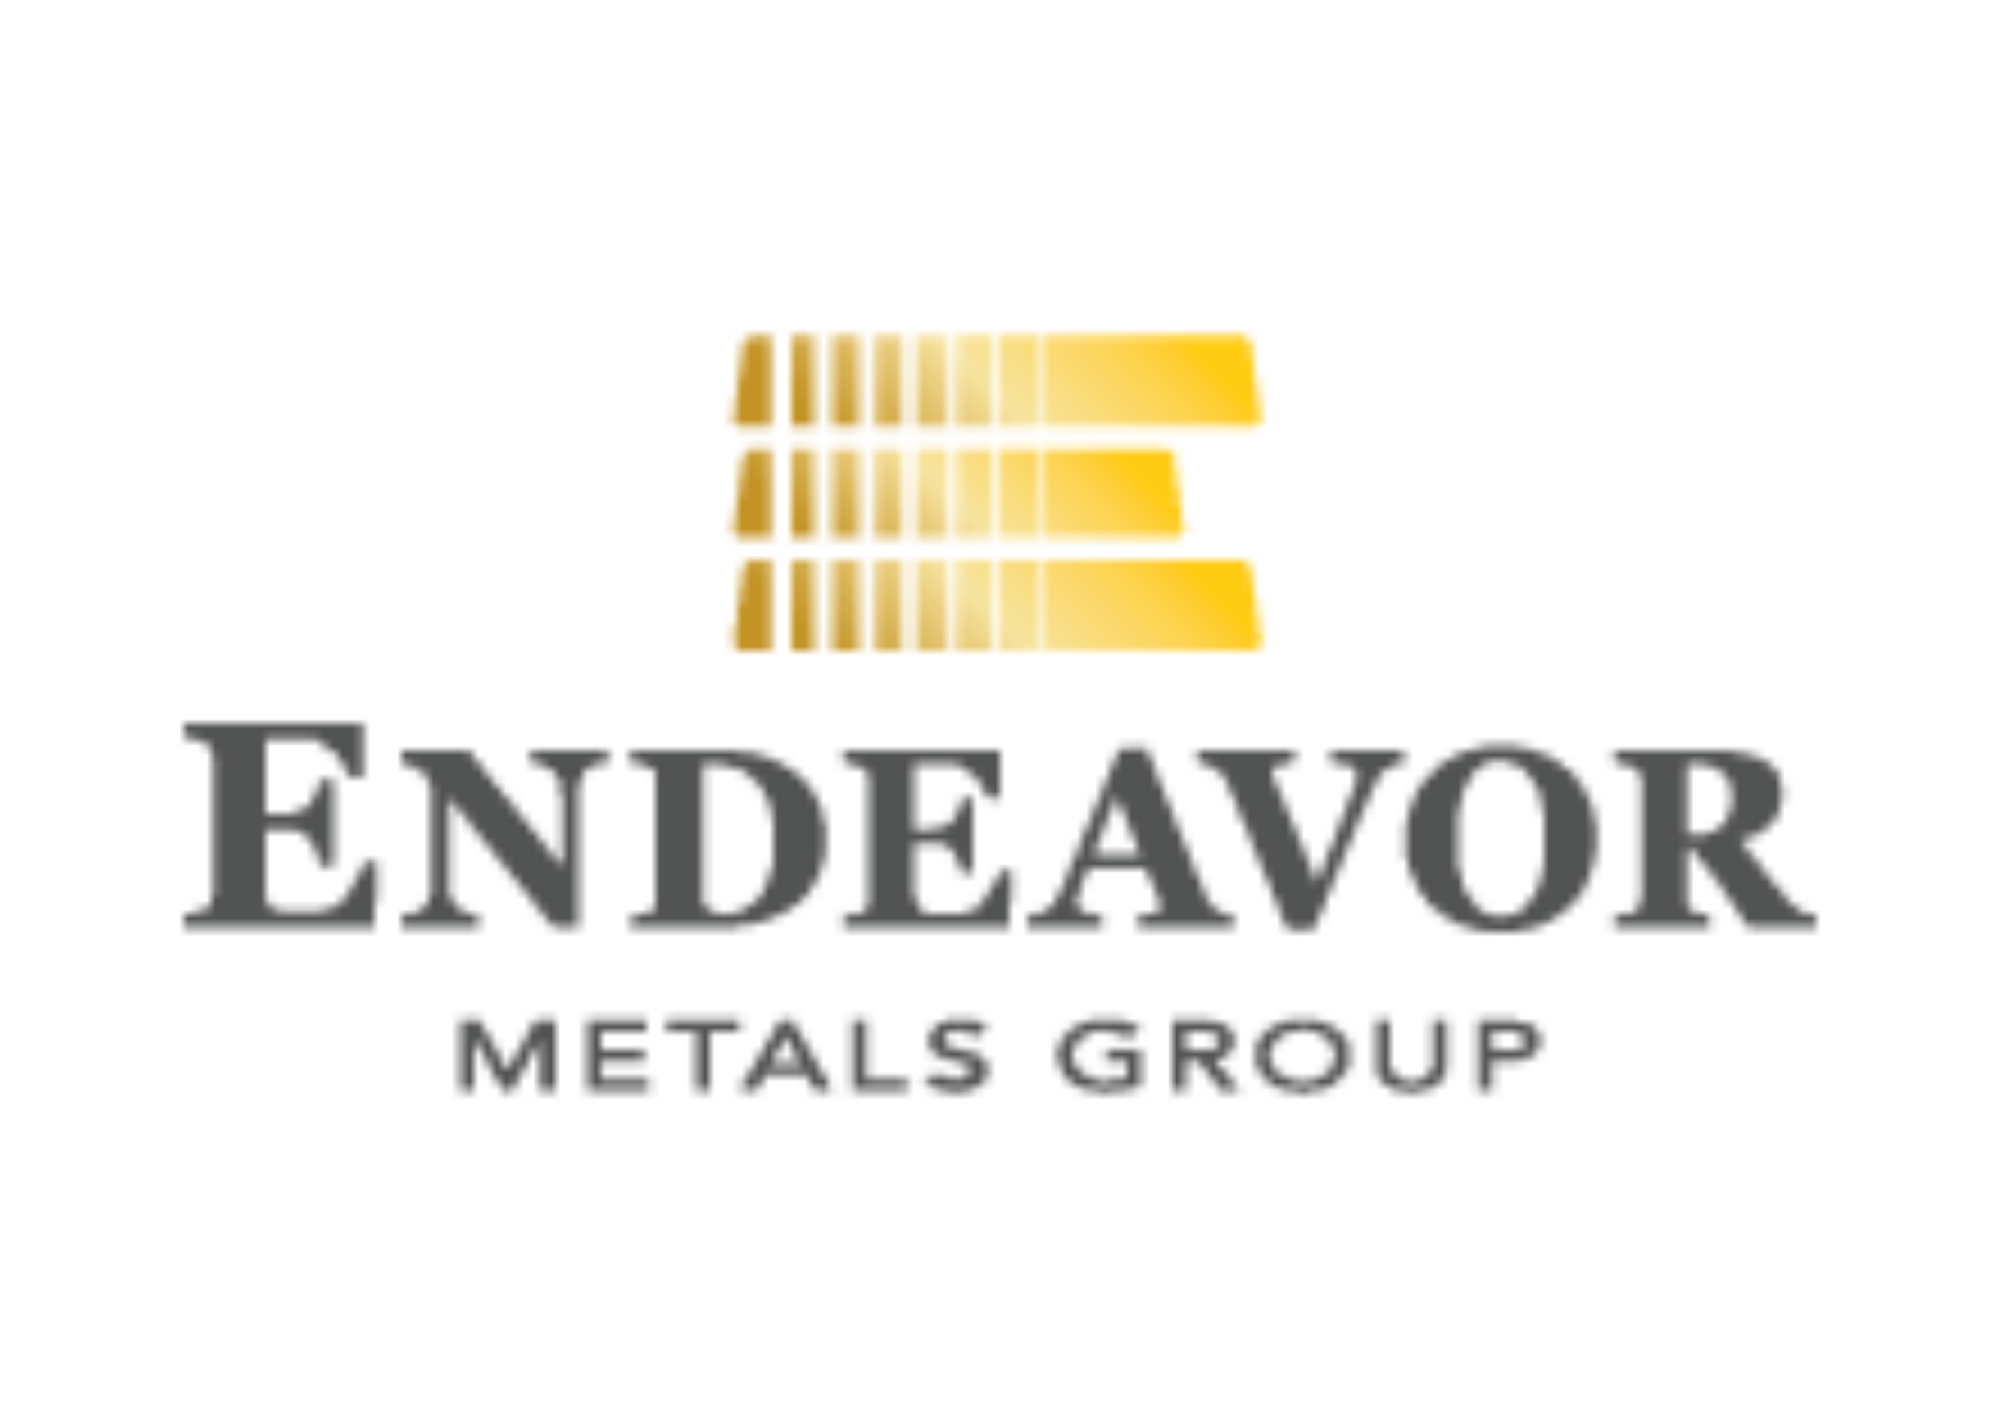 Endeavor Metals Group, Tuesday, July 5, 2022, Press release picture